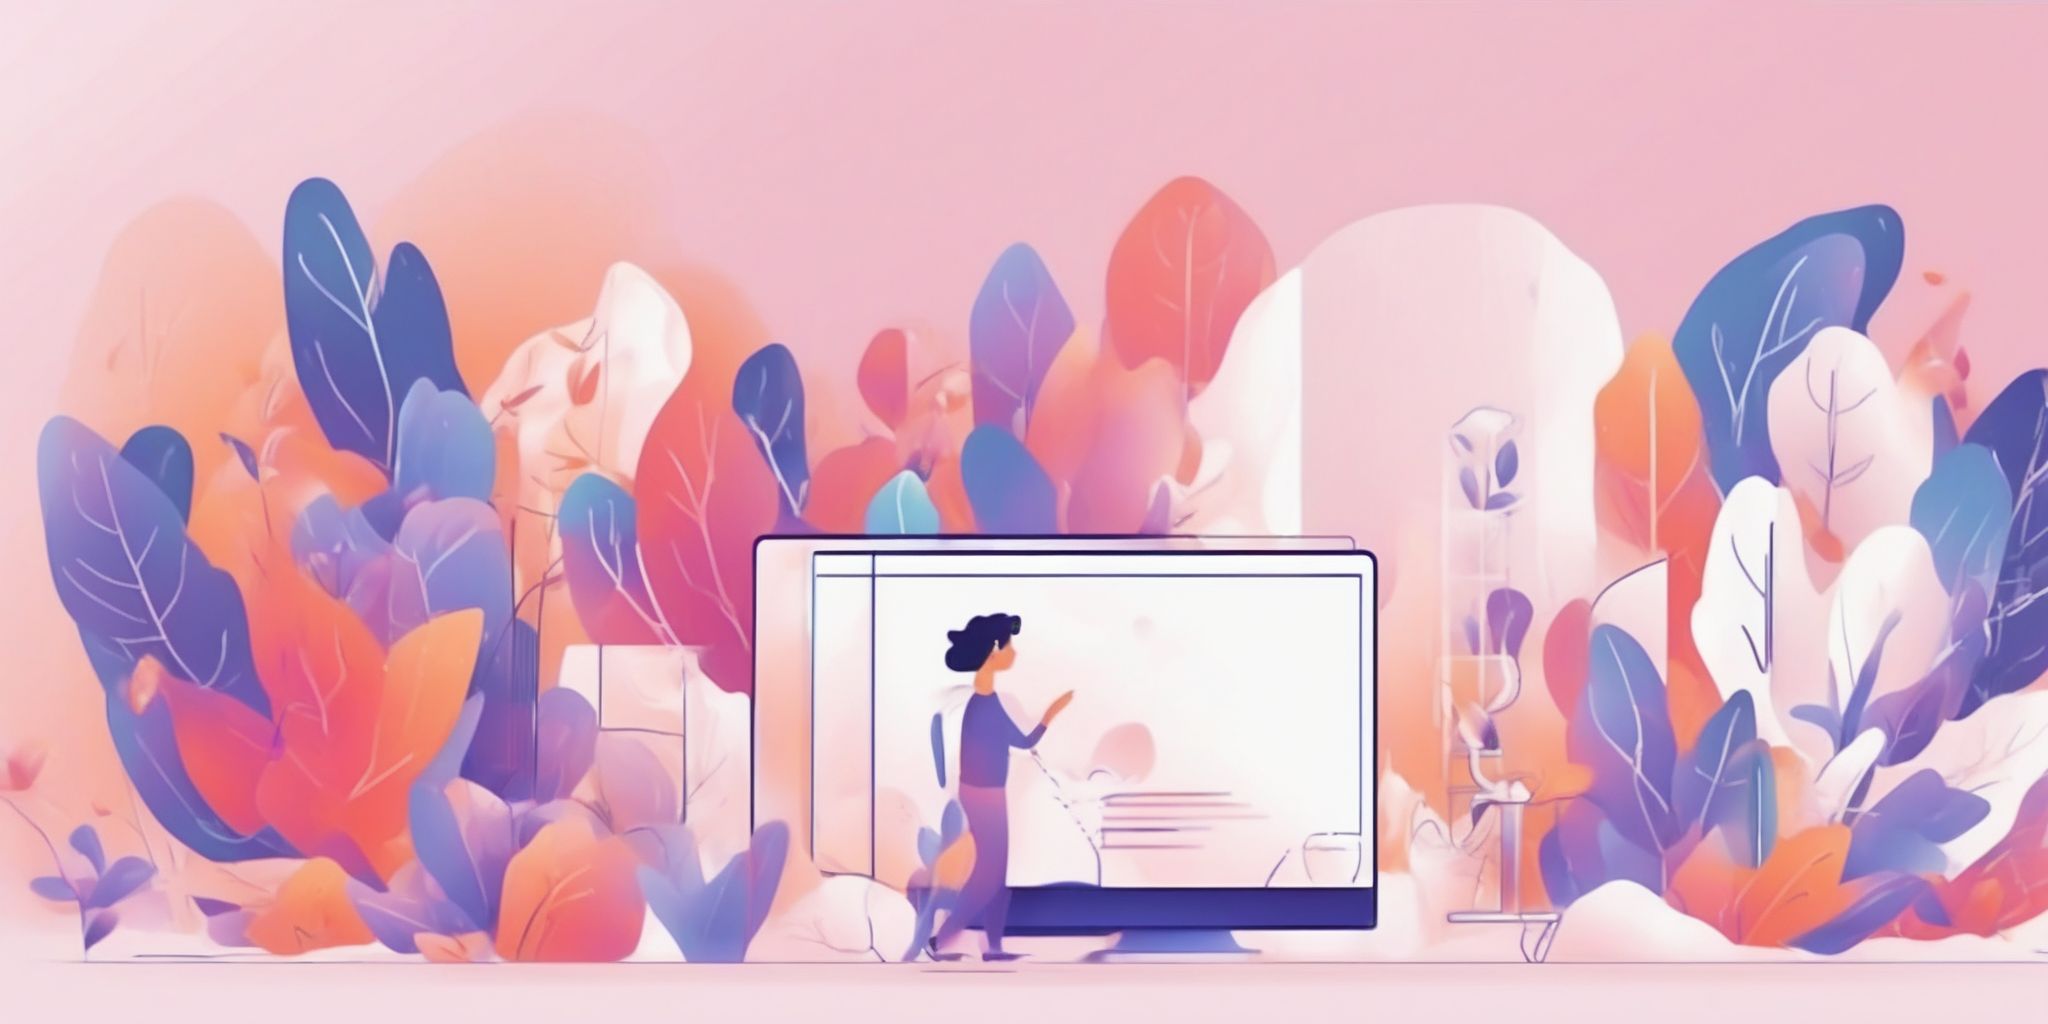 Video content in illustration style with gradients and white background